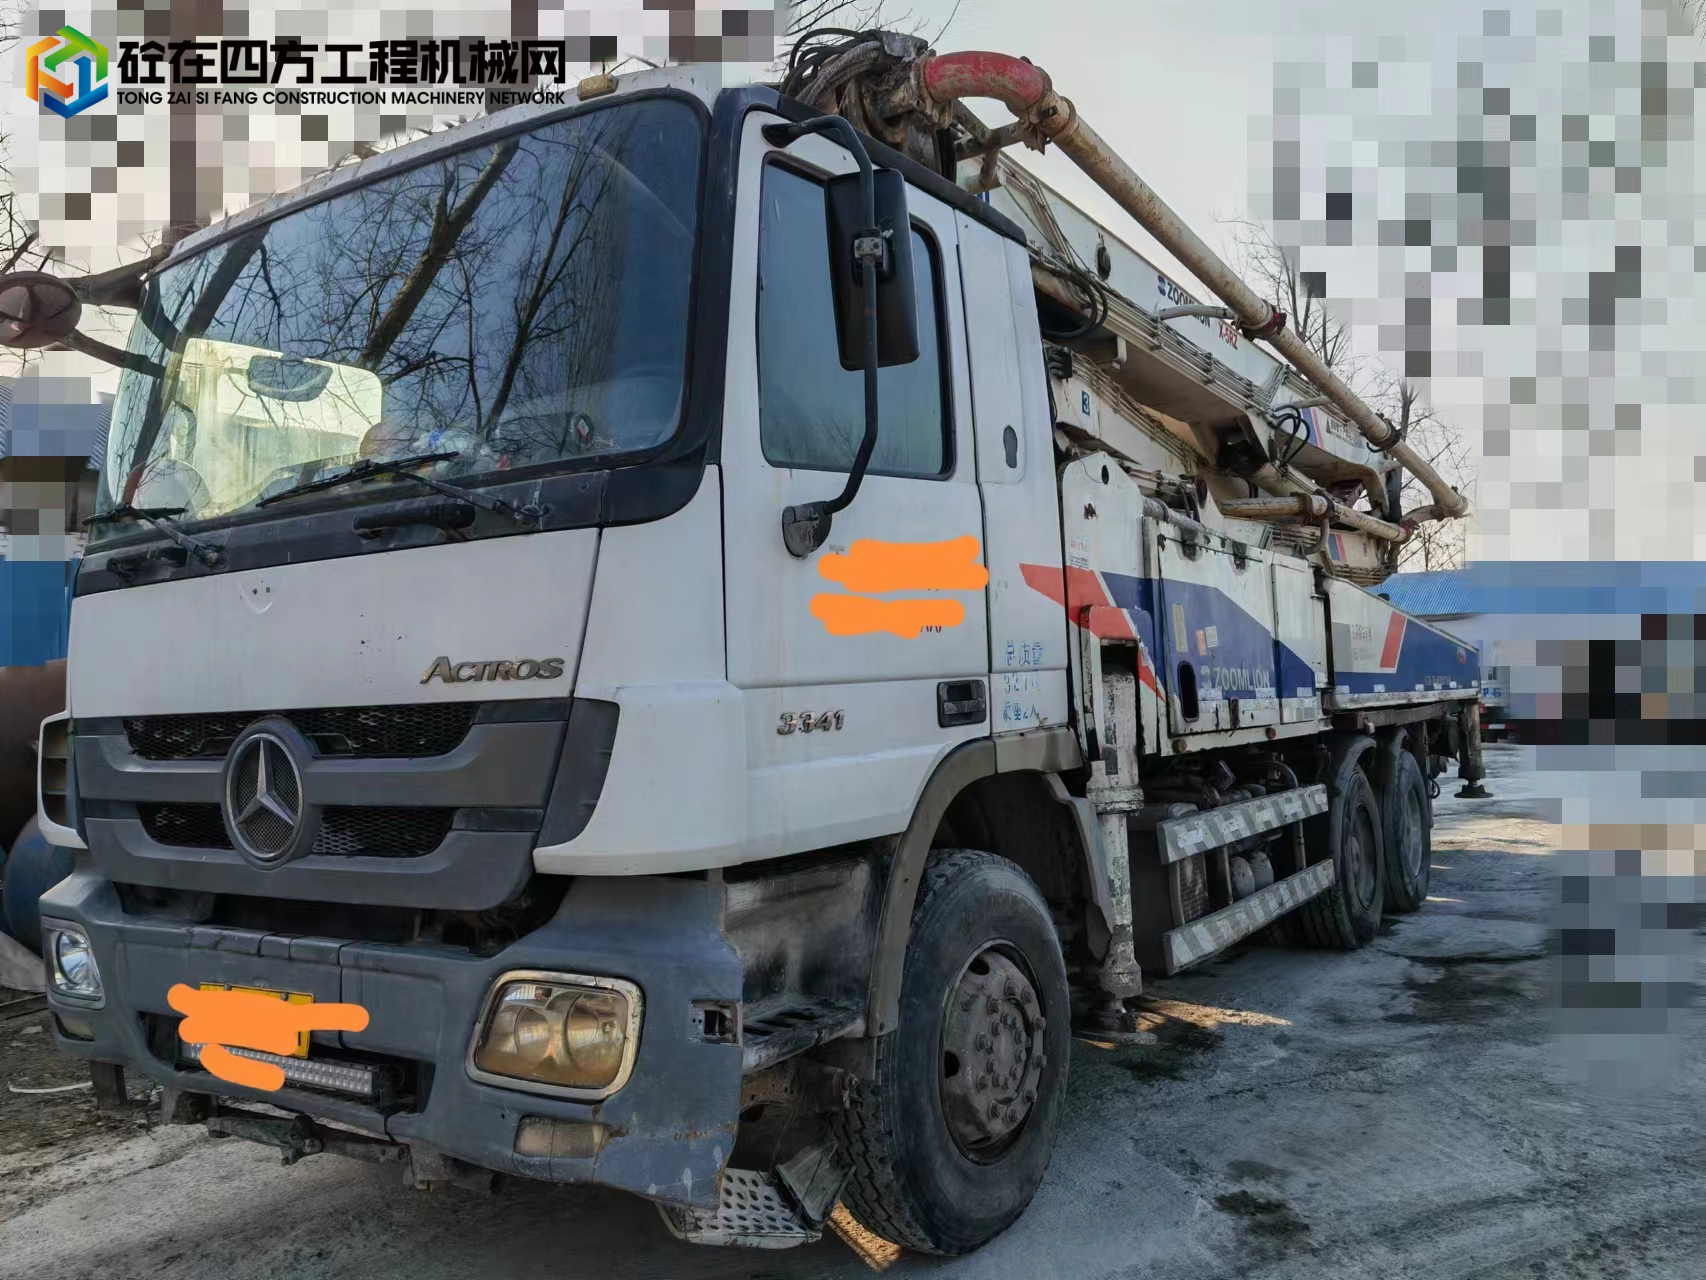 https://images.tongzsf.com/tong/truck_machine/20231206/1656fded9a1265.jpg